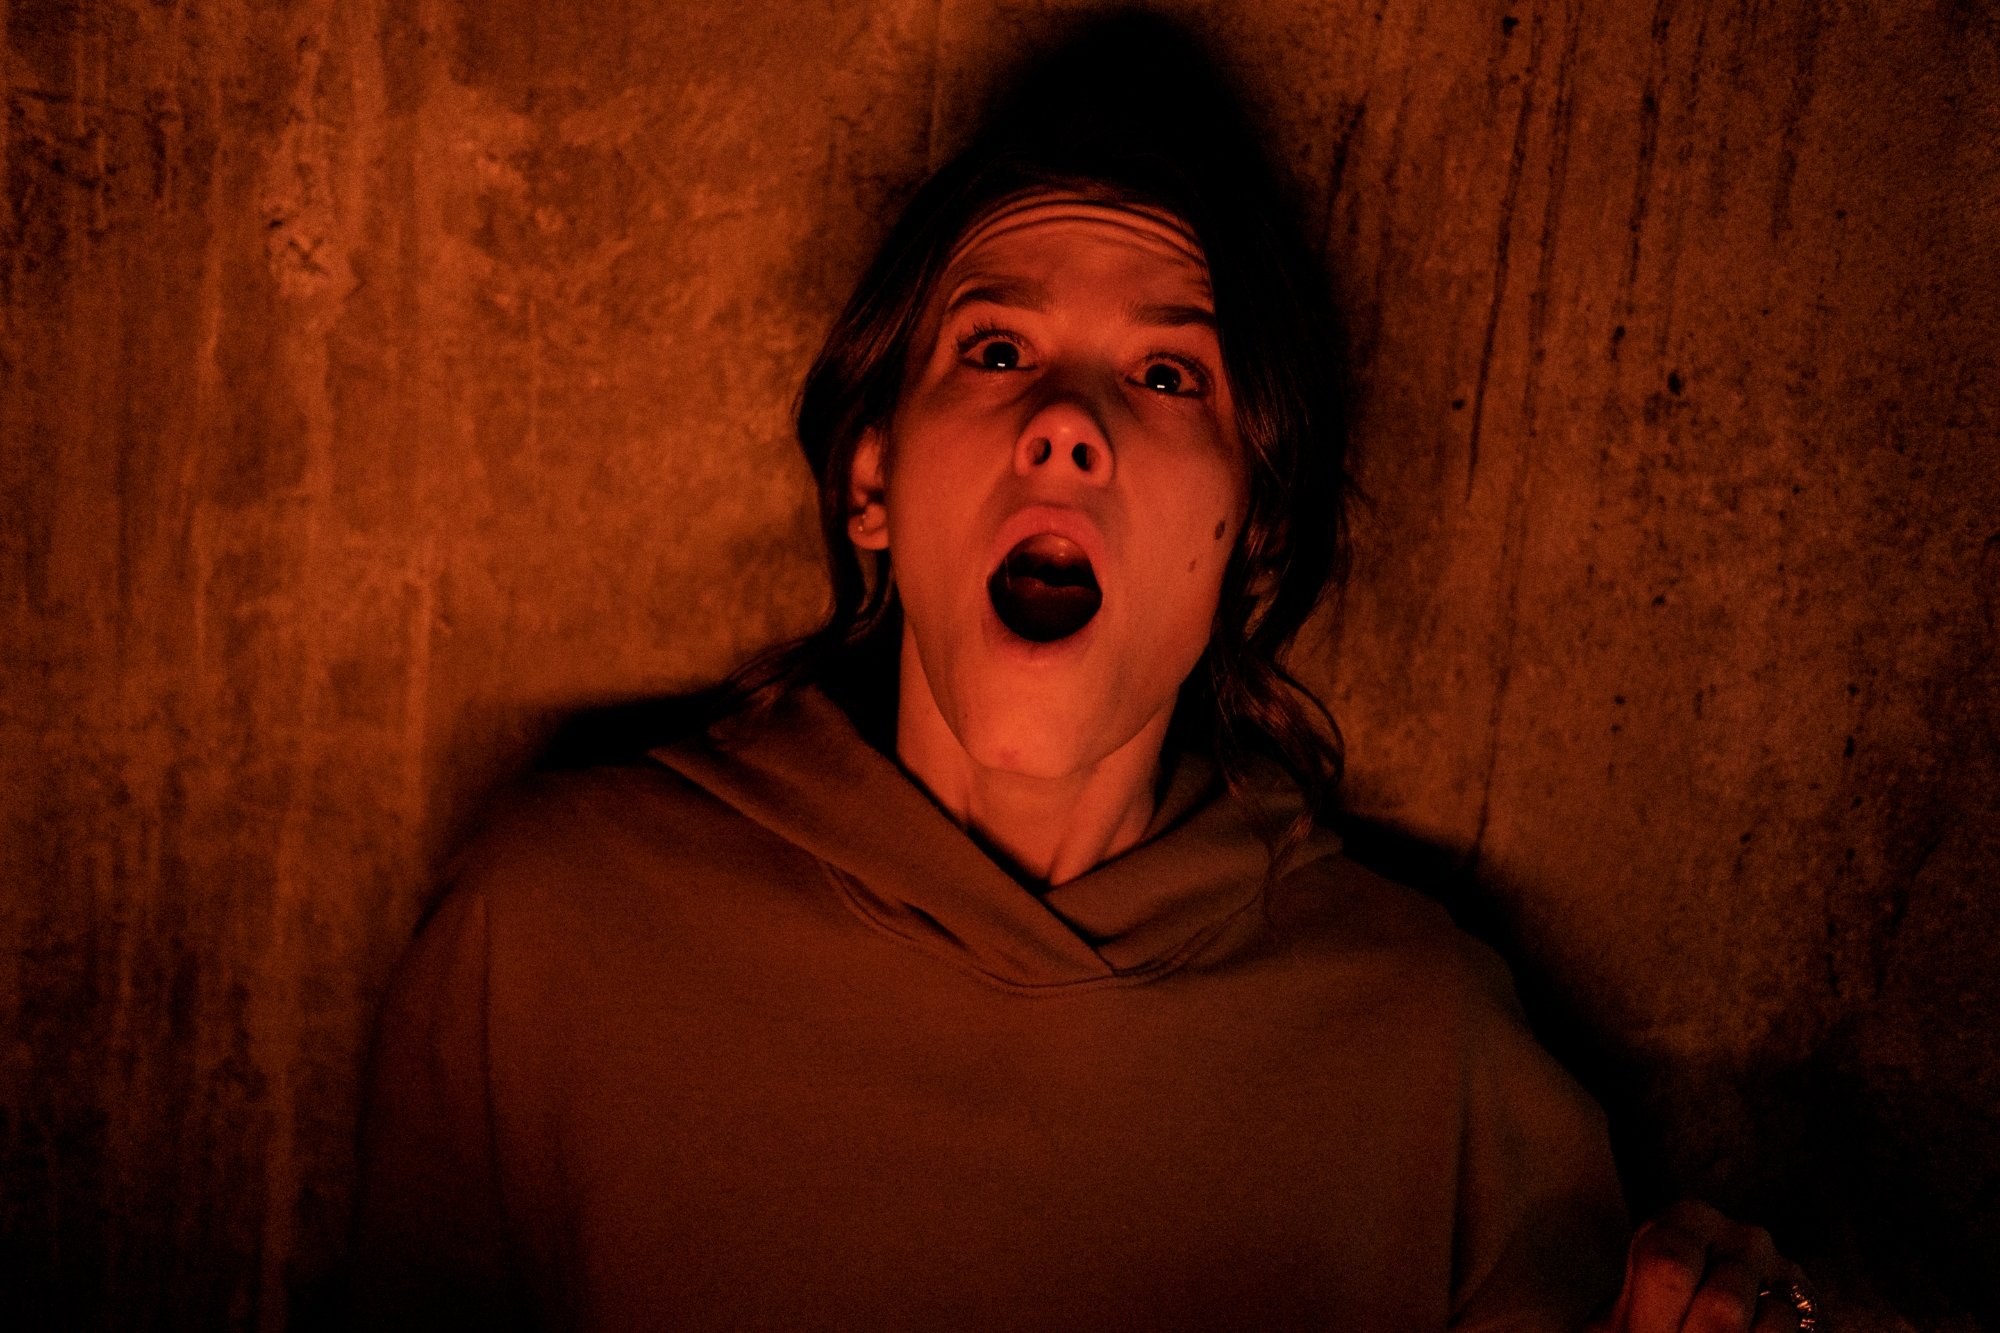 'Smile' Sosie Bacon as Dr. Rose Cotter. She's laying on a wooden floor wearing a hoodie with her jaw dropped in shock.